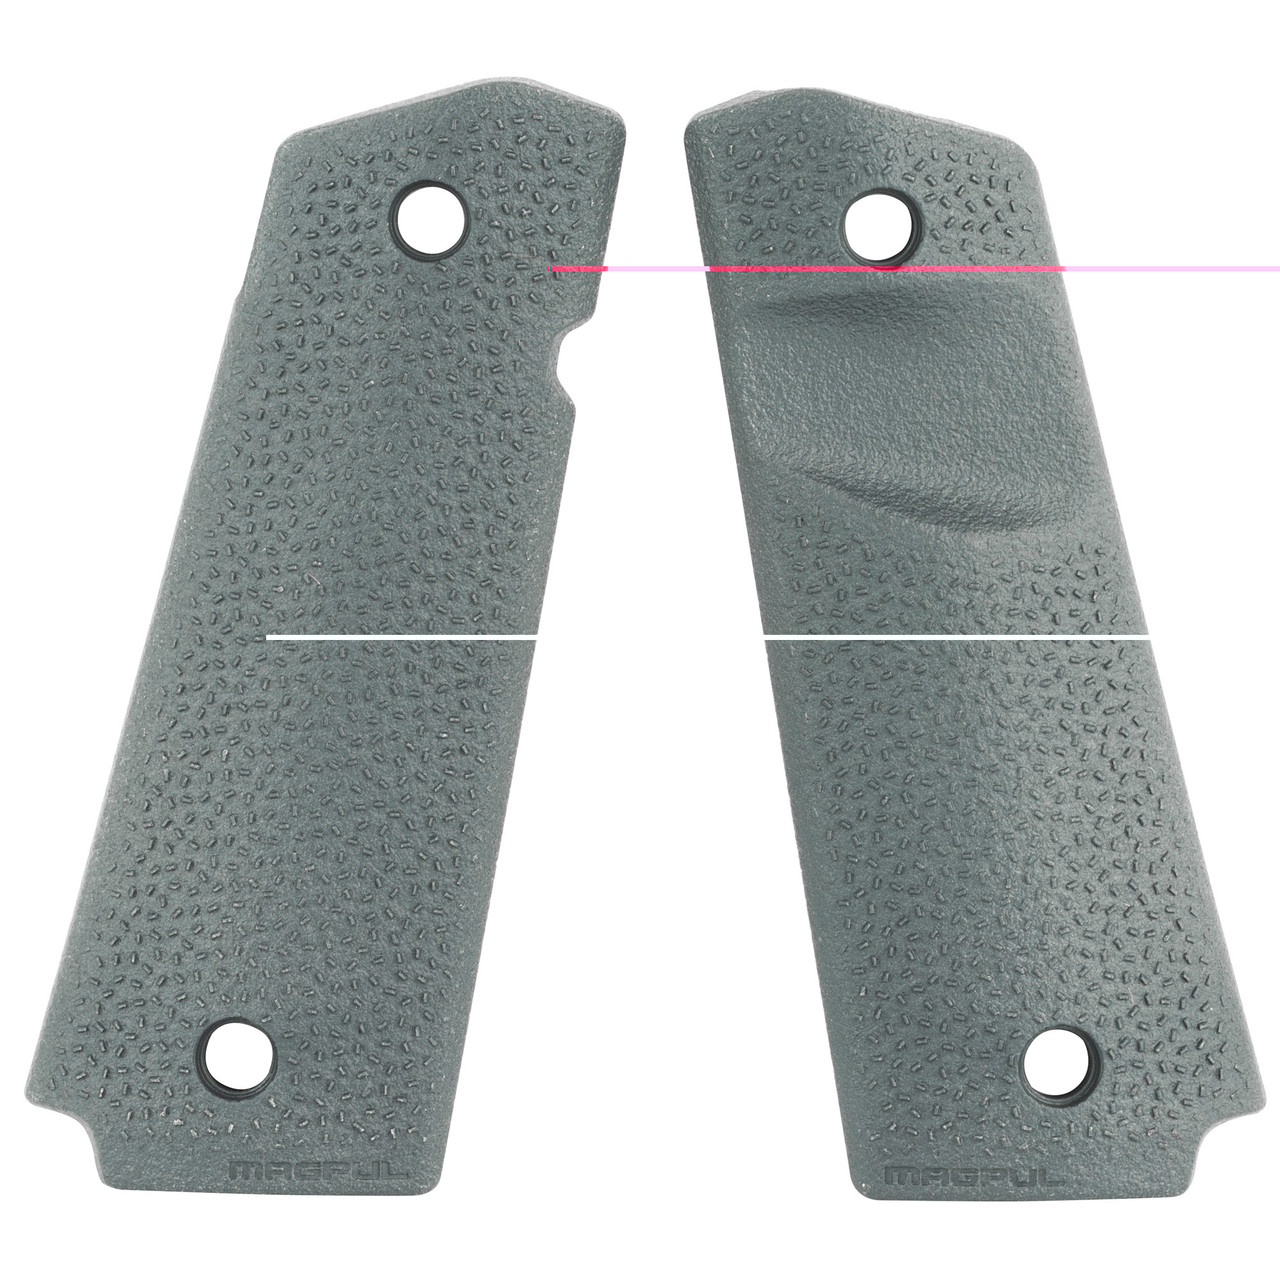 Magpul Industries MAG544-GRY Moe 1911 Grip Panels Tsp Gry